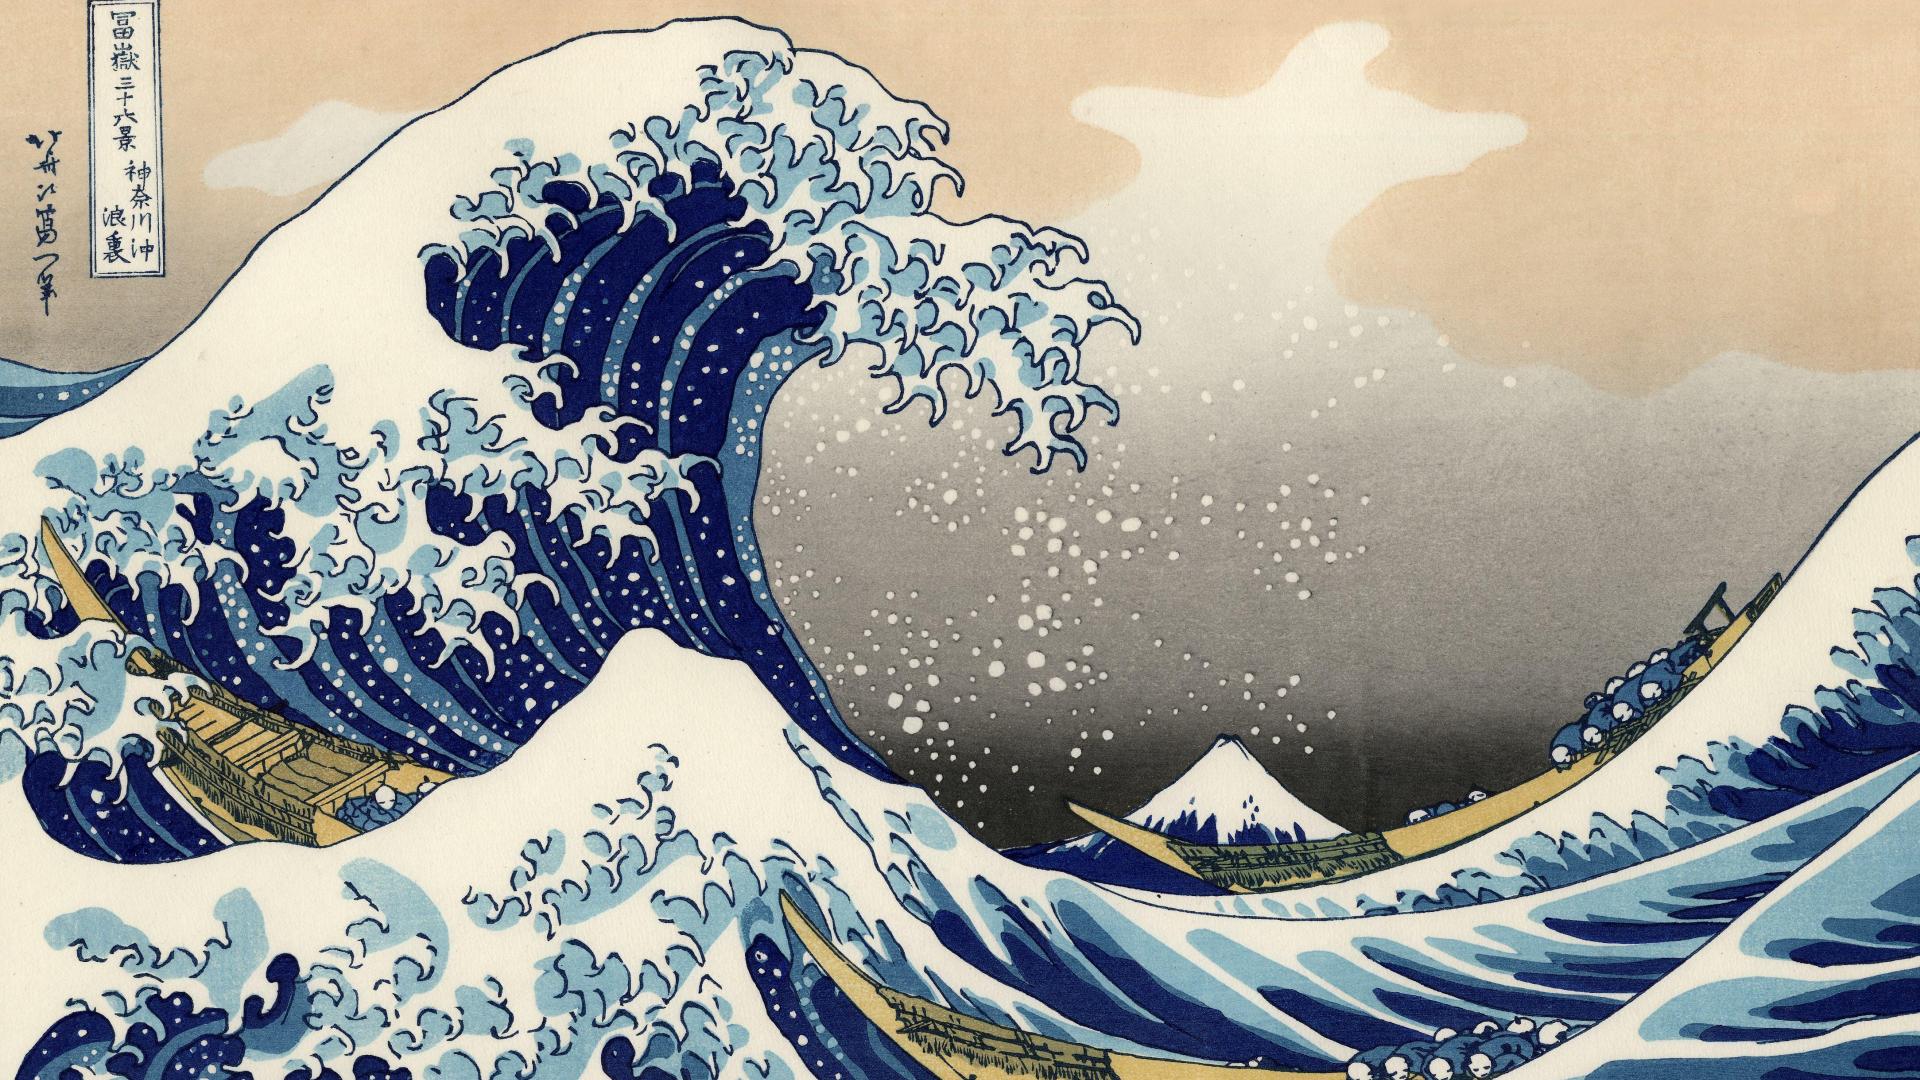 The great wave off kanagawa - - High Quality and other